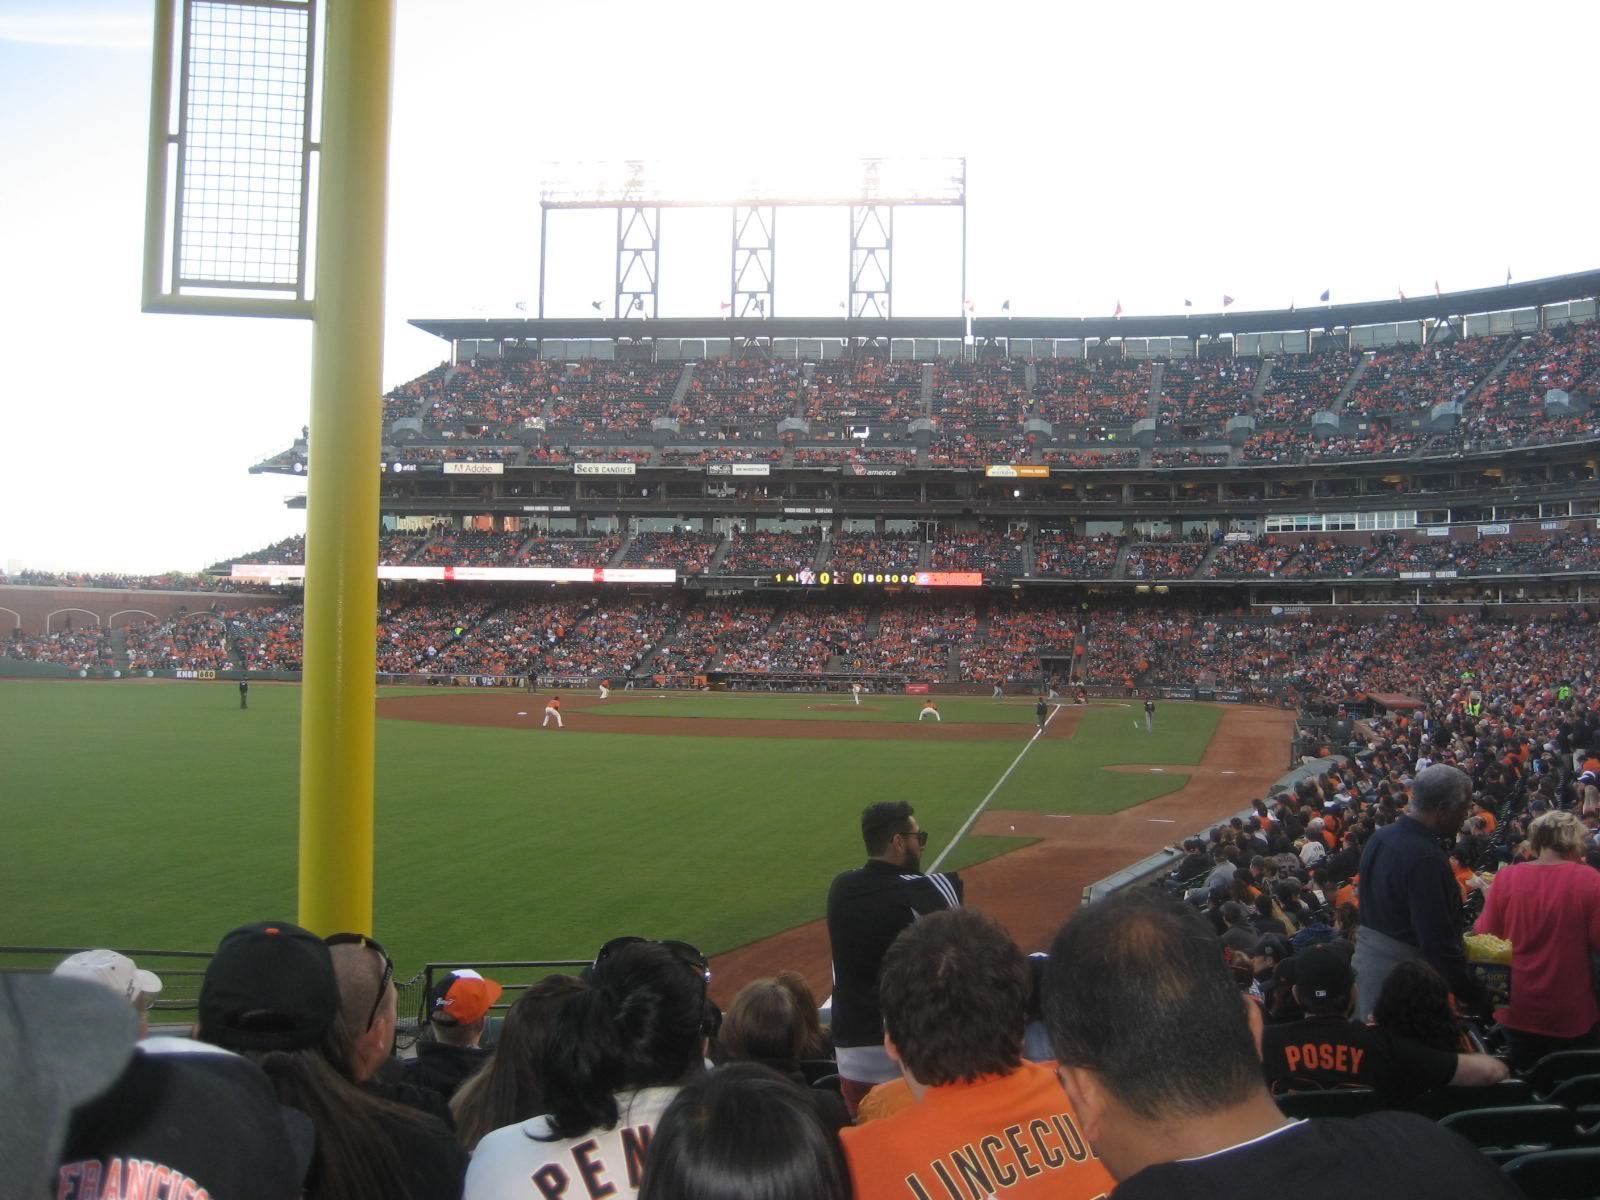 section 135, row 21 seat view  for baseball - oracle park